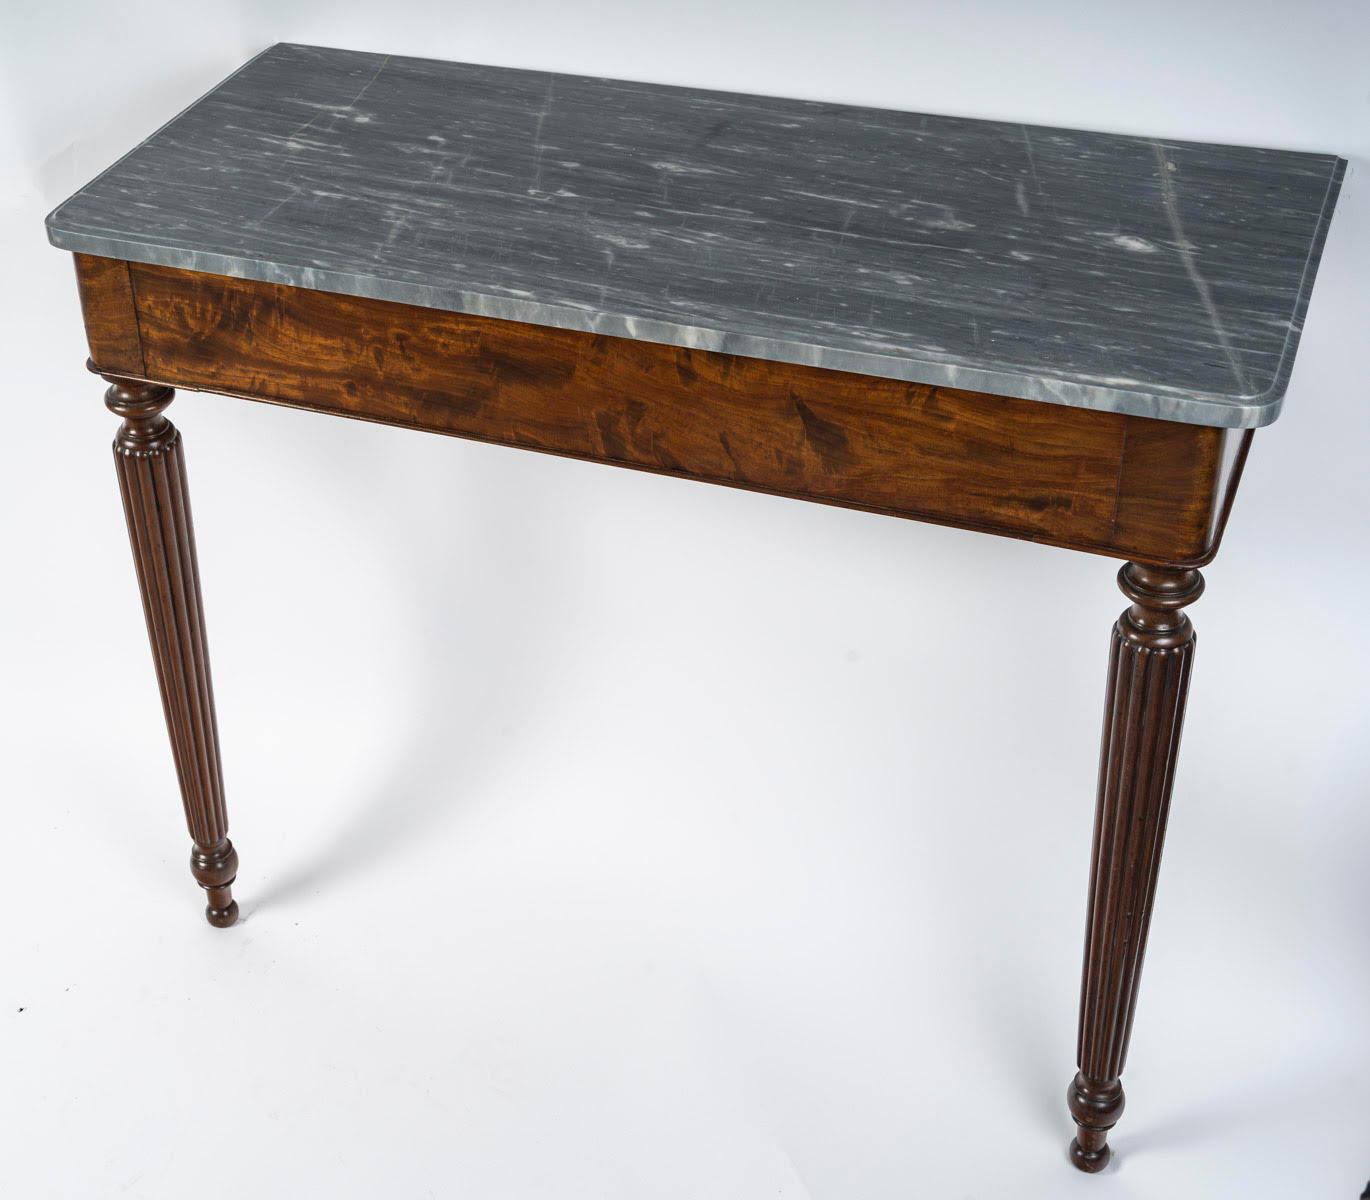 A Louis Philippe period mahogany and marble top console table, 19th century.

Louis Philippe period mahogany wall console with marble top, 19th century.  
h: 71,5cm, w: 87cm, d: 37cm